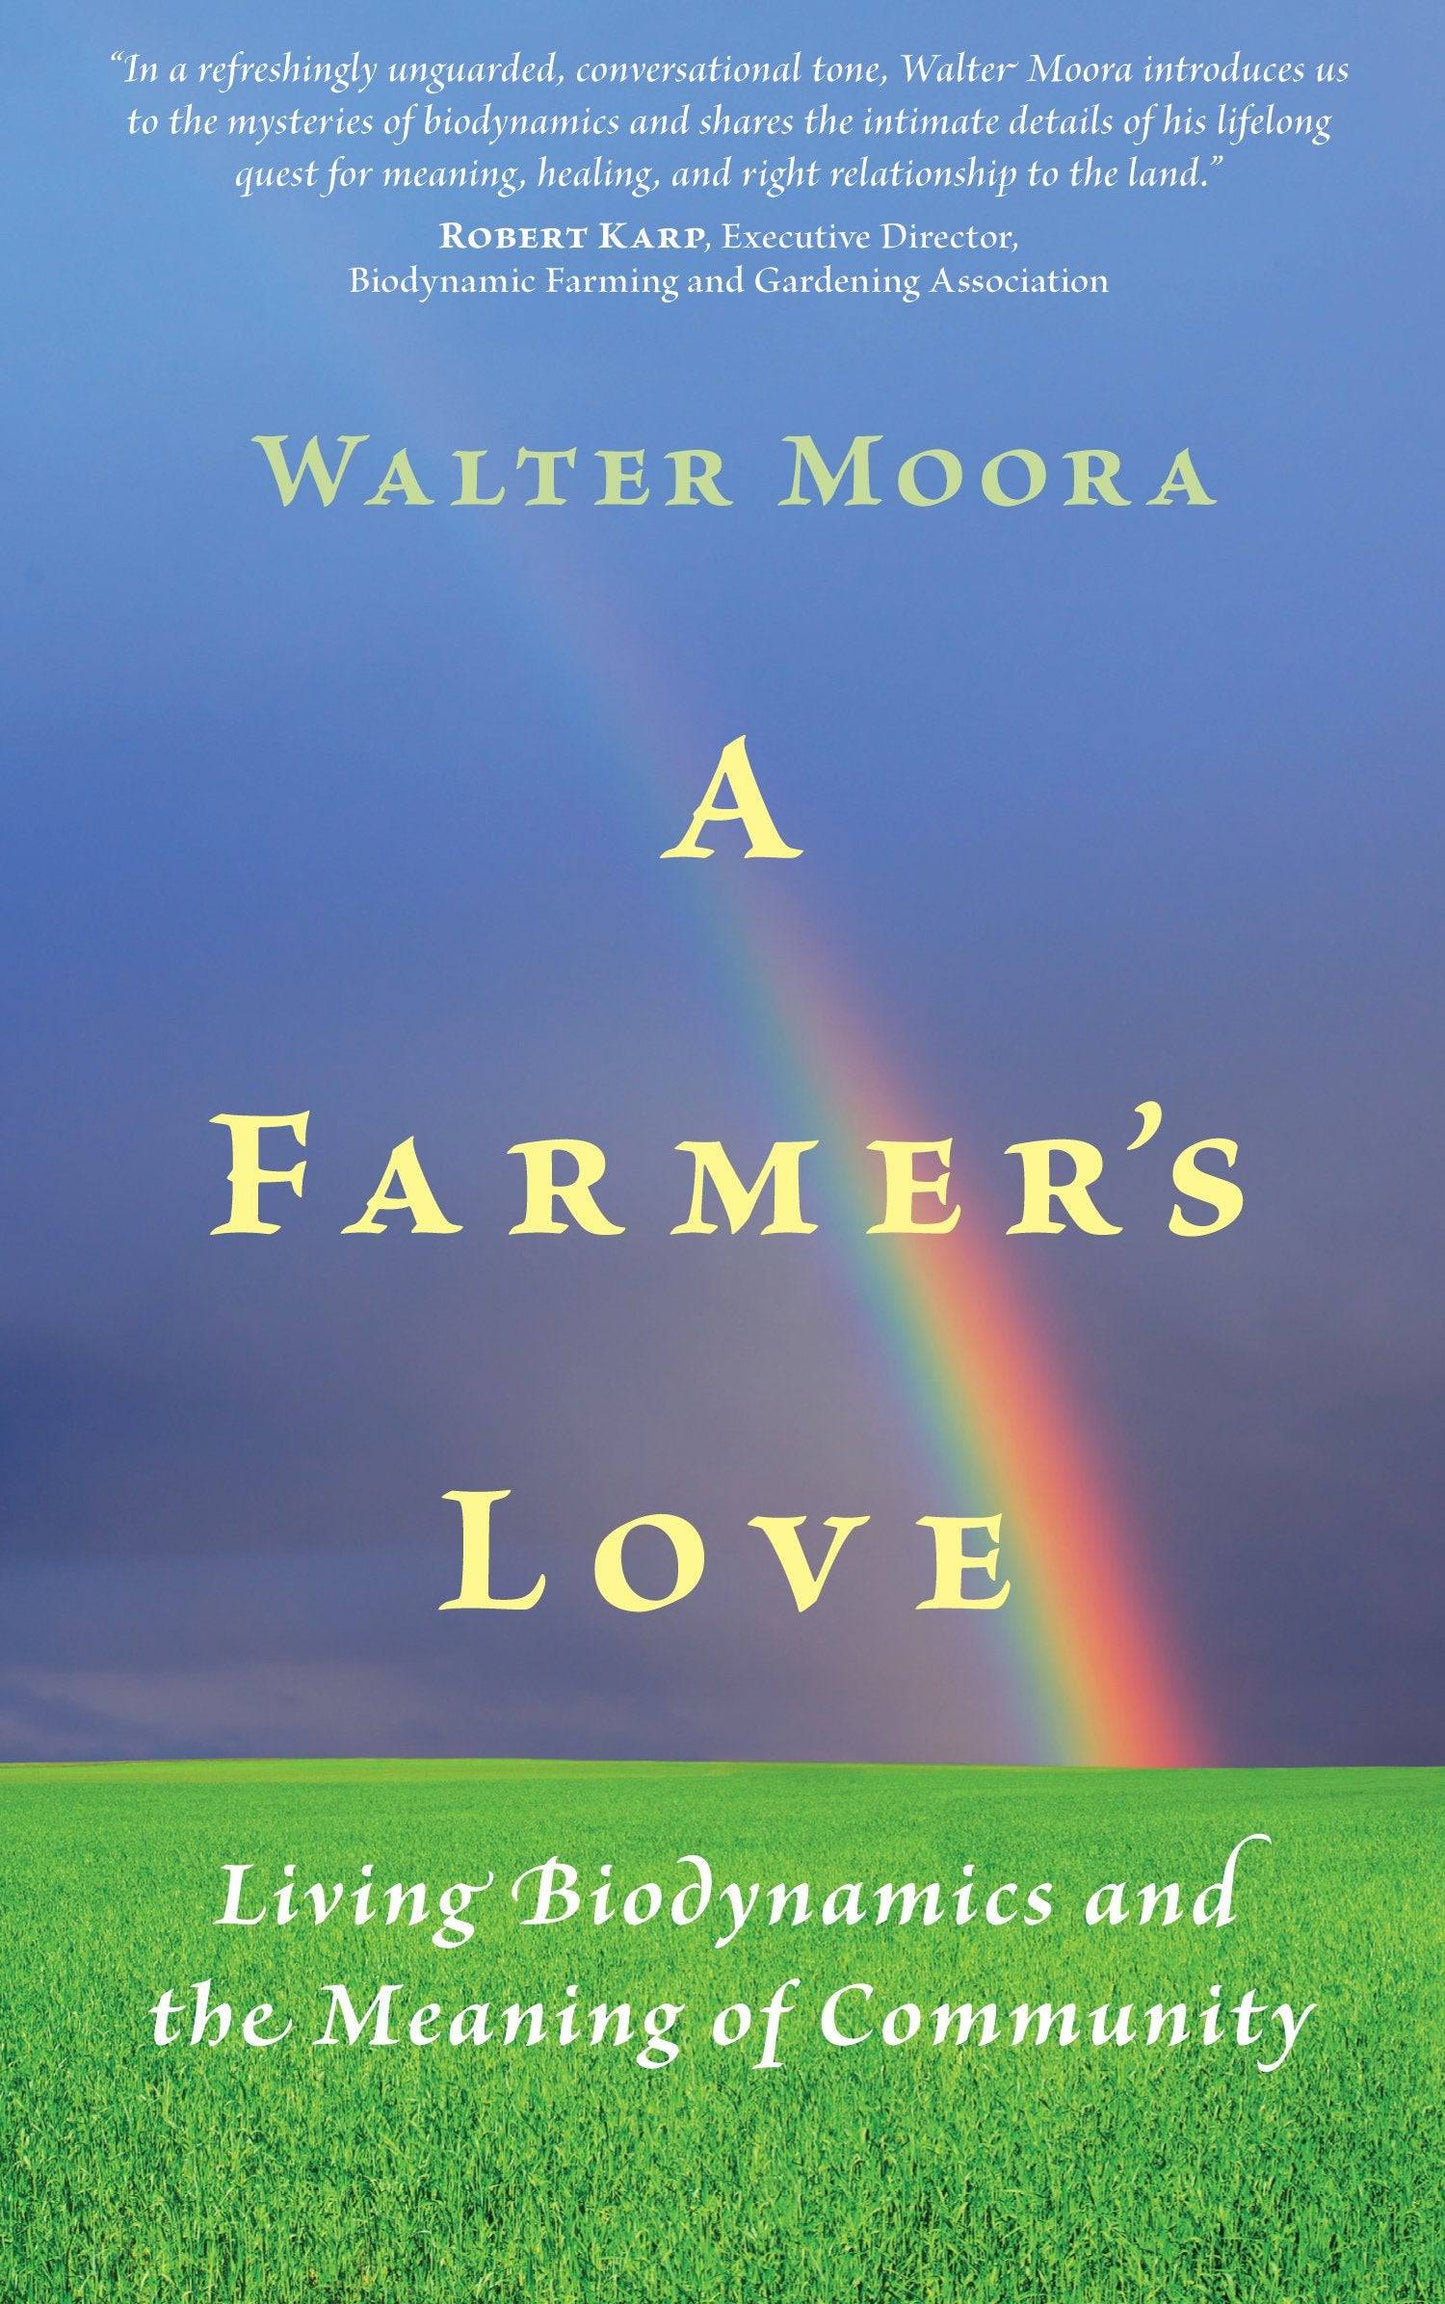 A Farmer's Love: Living Biodynamics and the Meaning of Community by Walter Moora - The Josephine Porter Institute